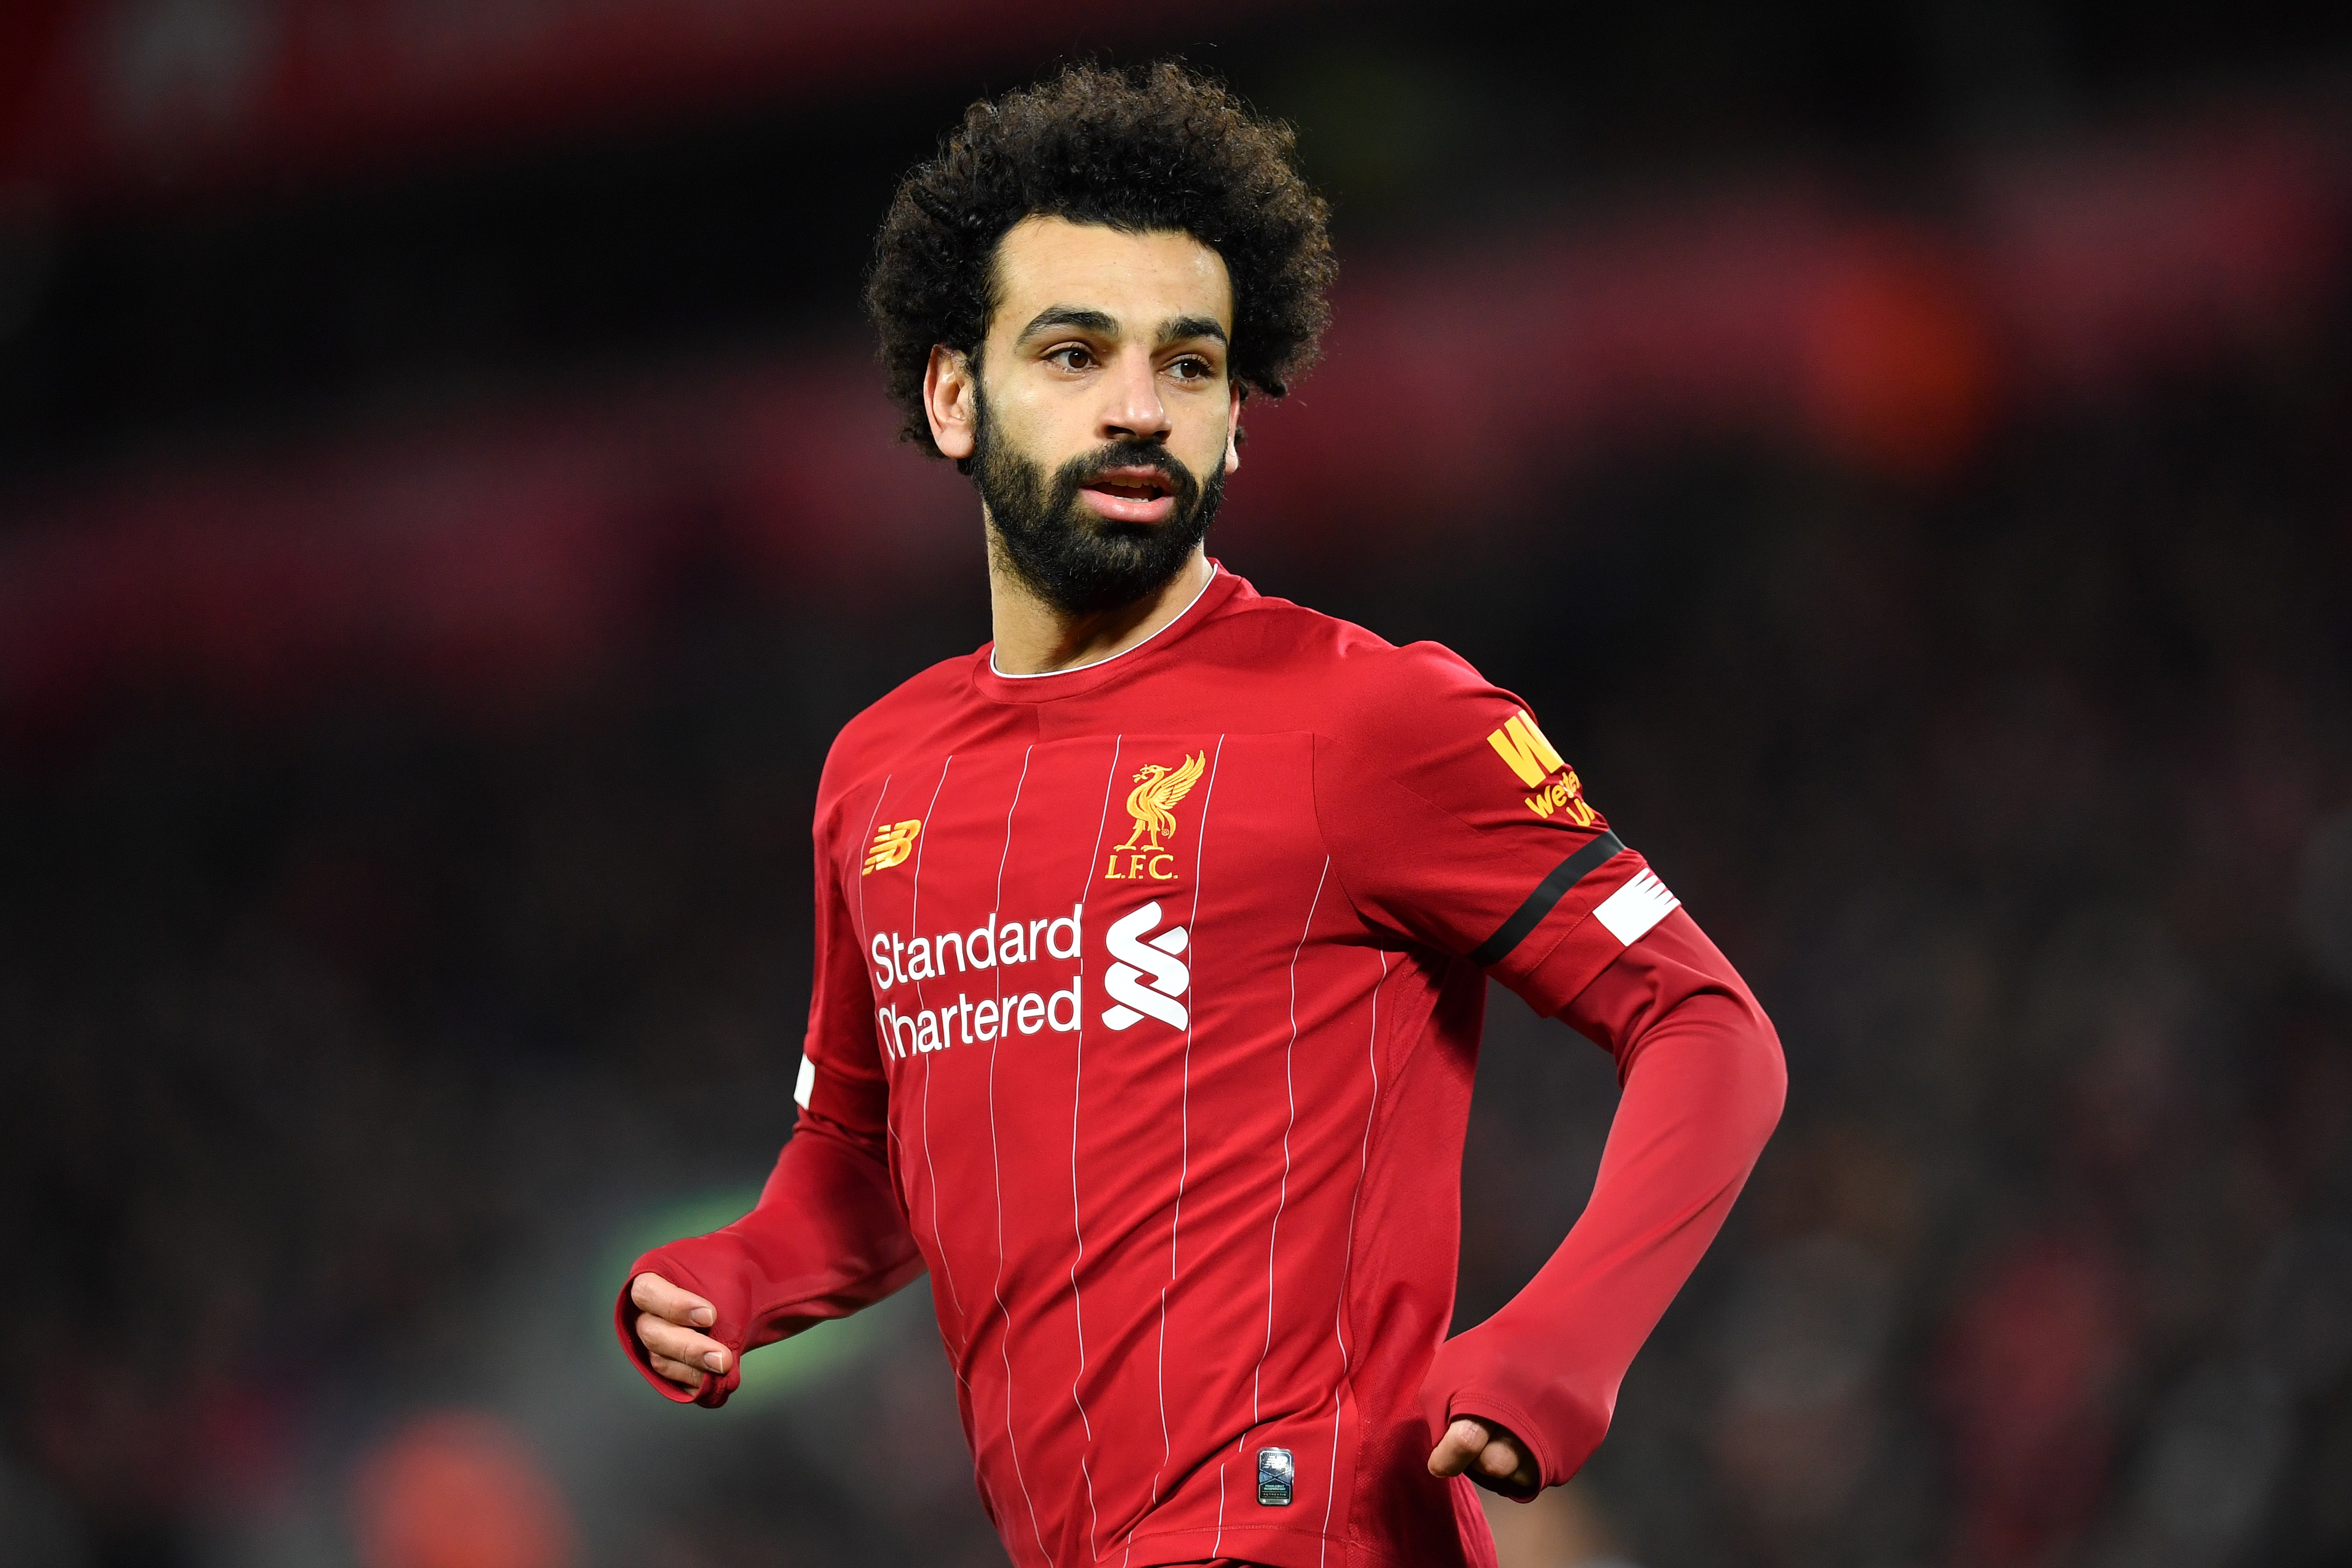 Salah will be hoping to bounce back strongly. (Photo by Paul Ellis/AFP via Getty Images)